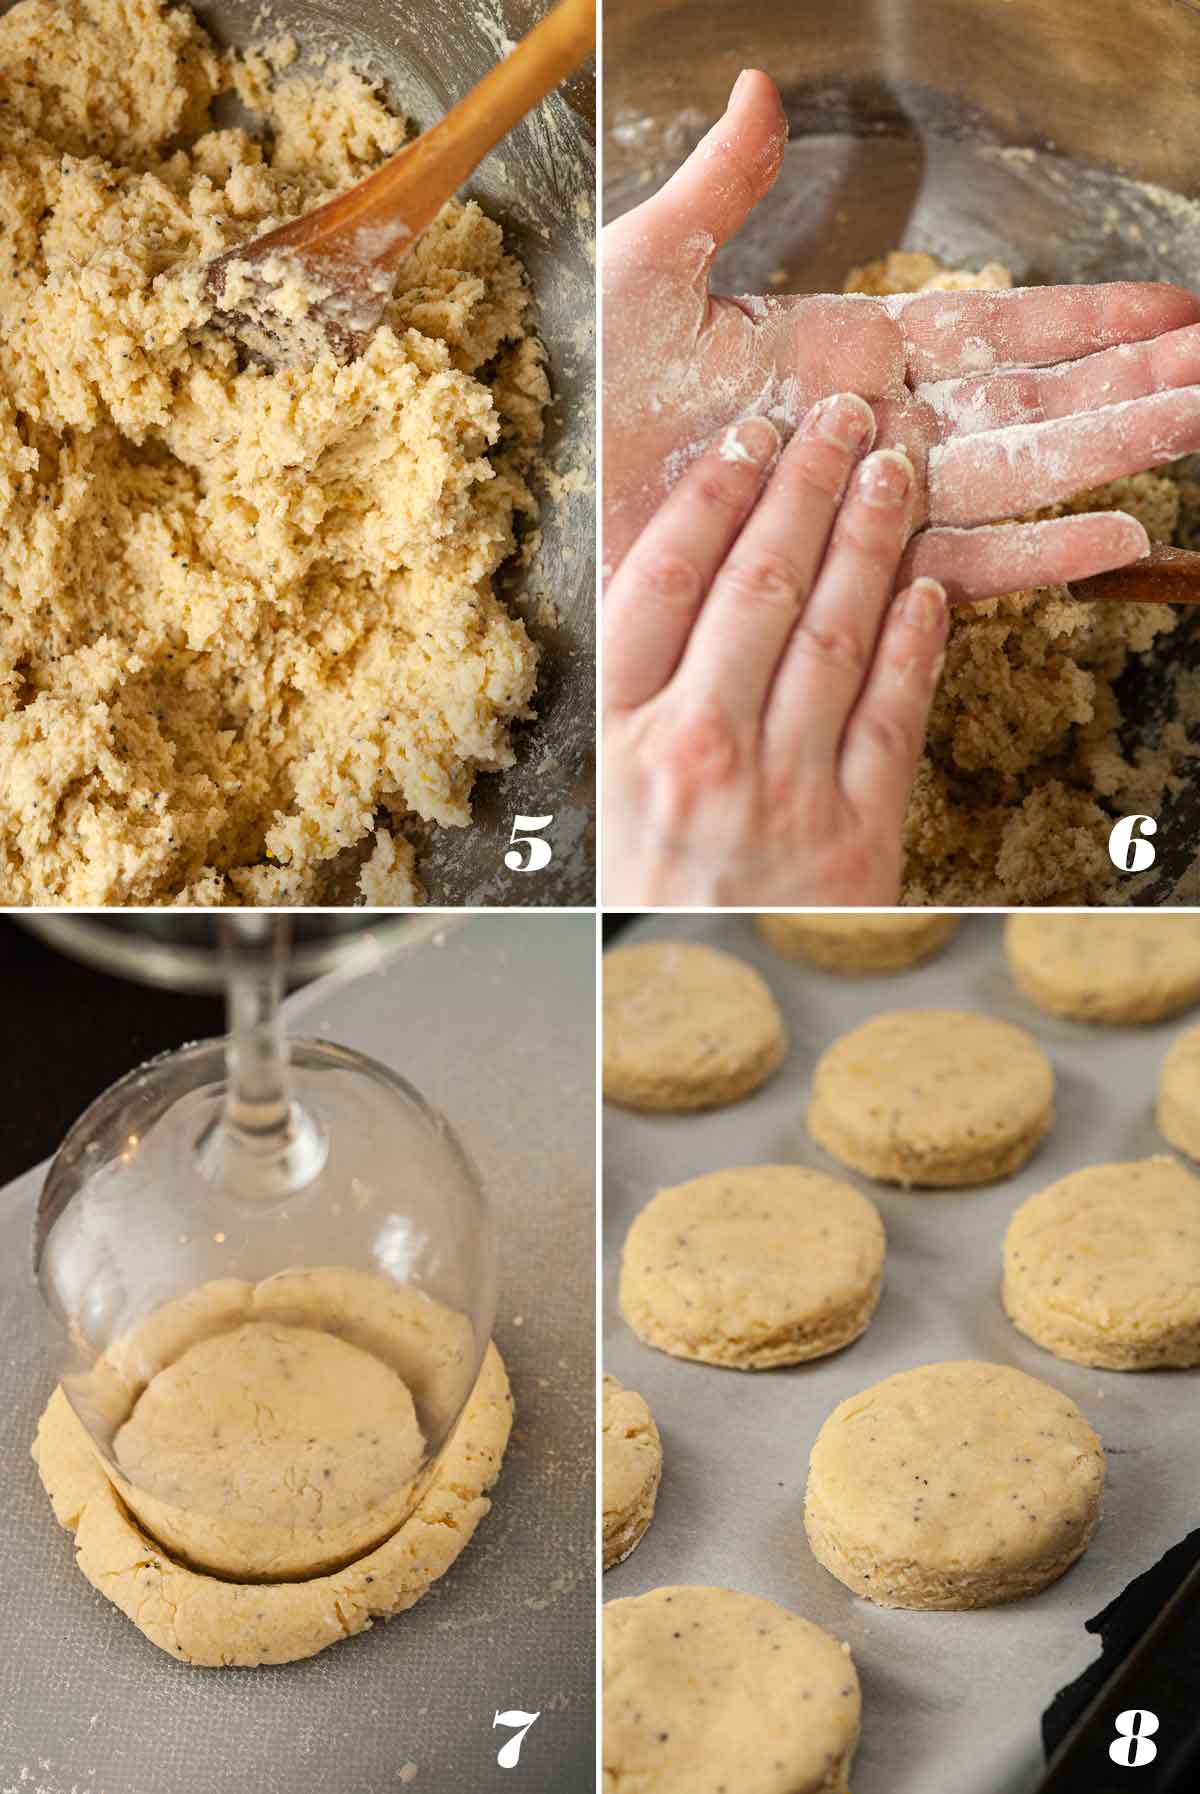 A collage of 4 numbered images showing how to shape scones.